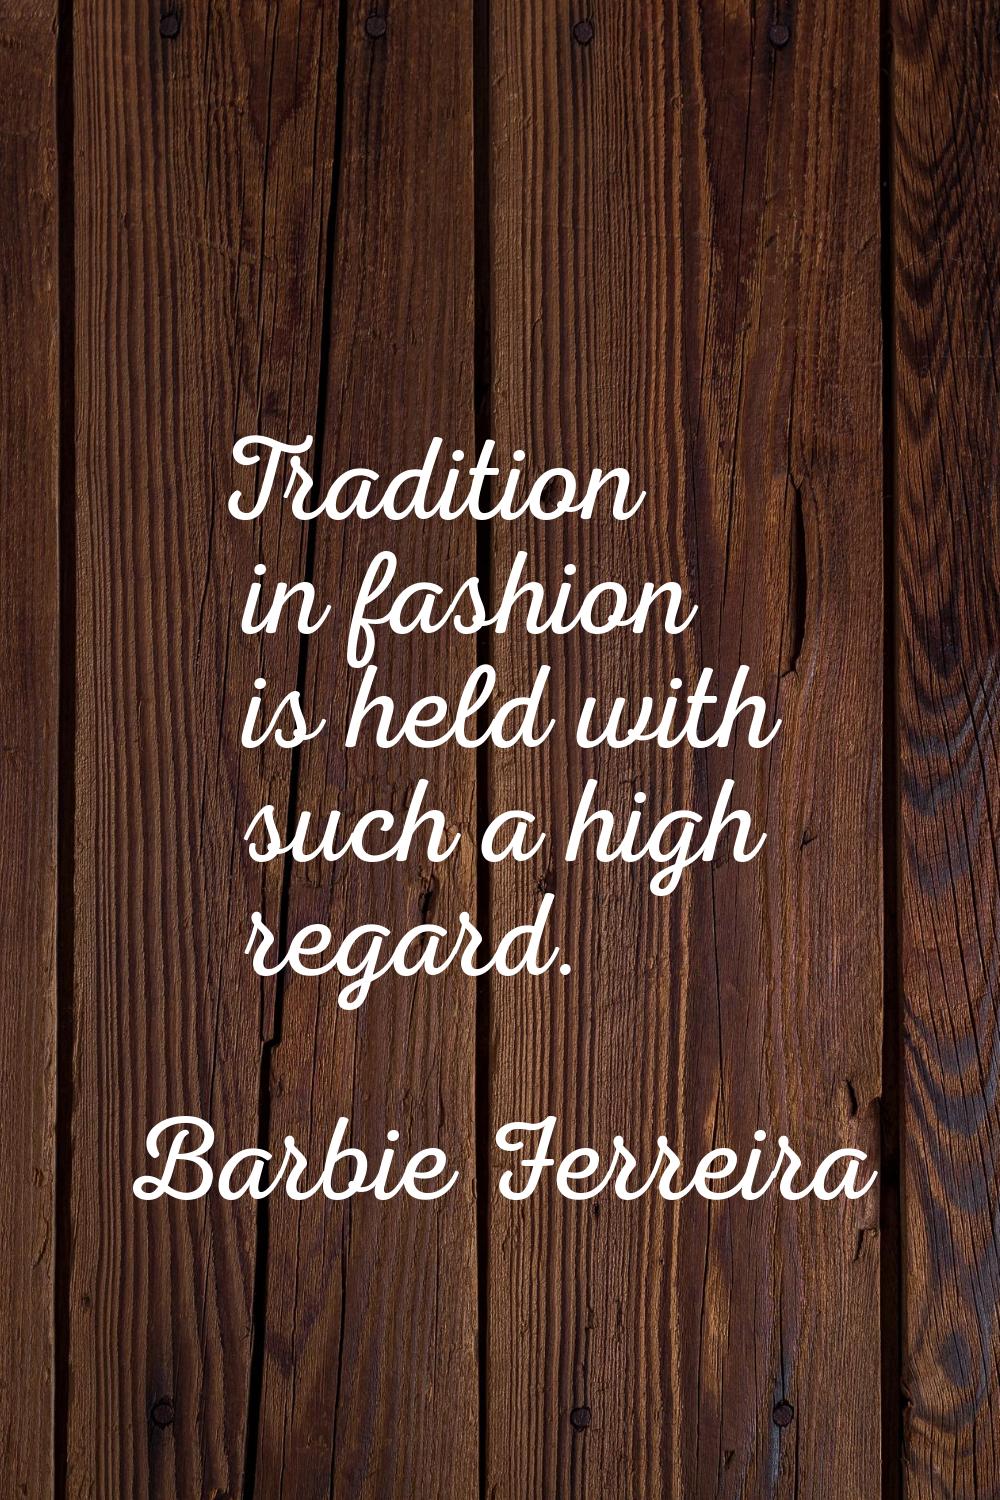 Tradition in fashion is held with such a high regard.